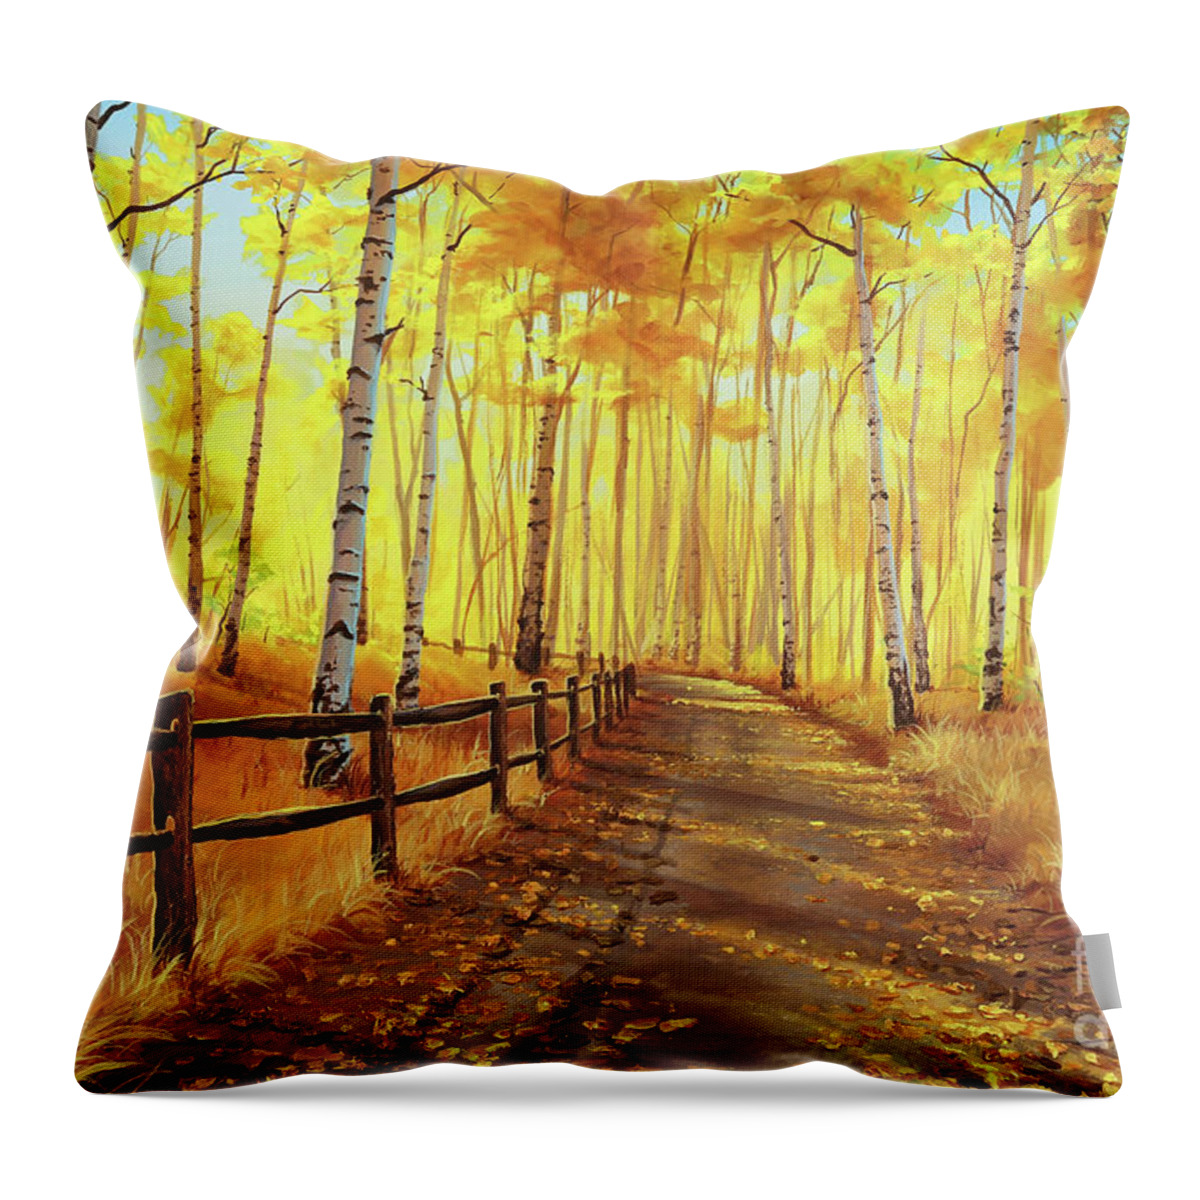 Autumn Forest Throw Pillow featuring the painting Golden Forest by Joe Mandrick